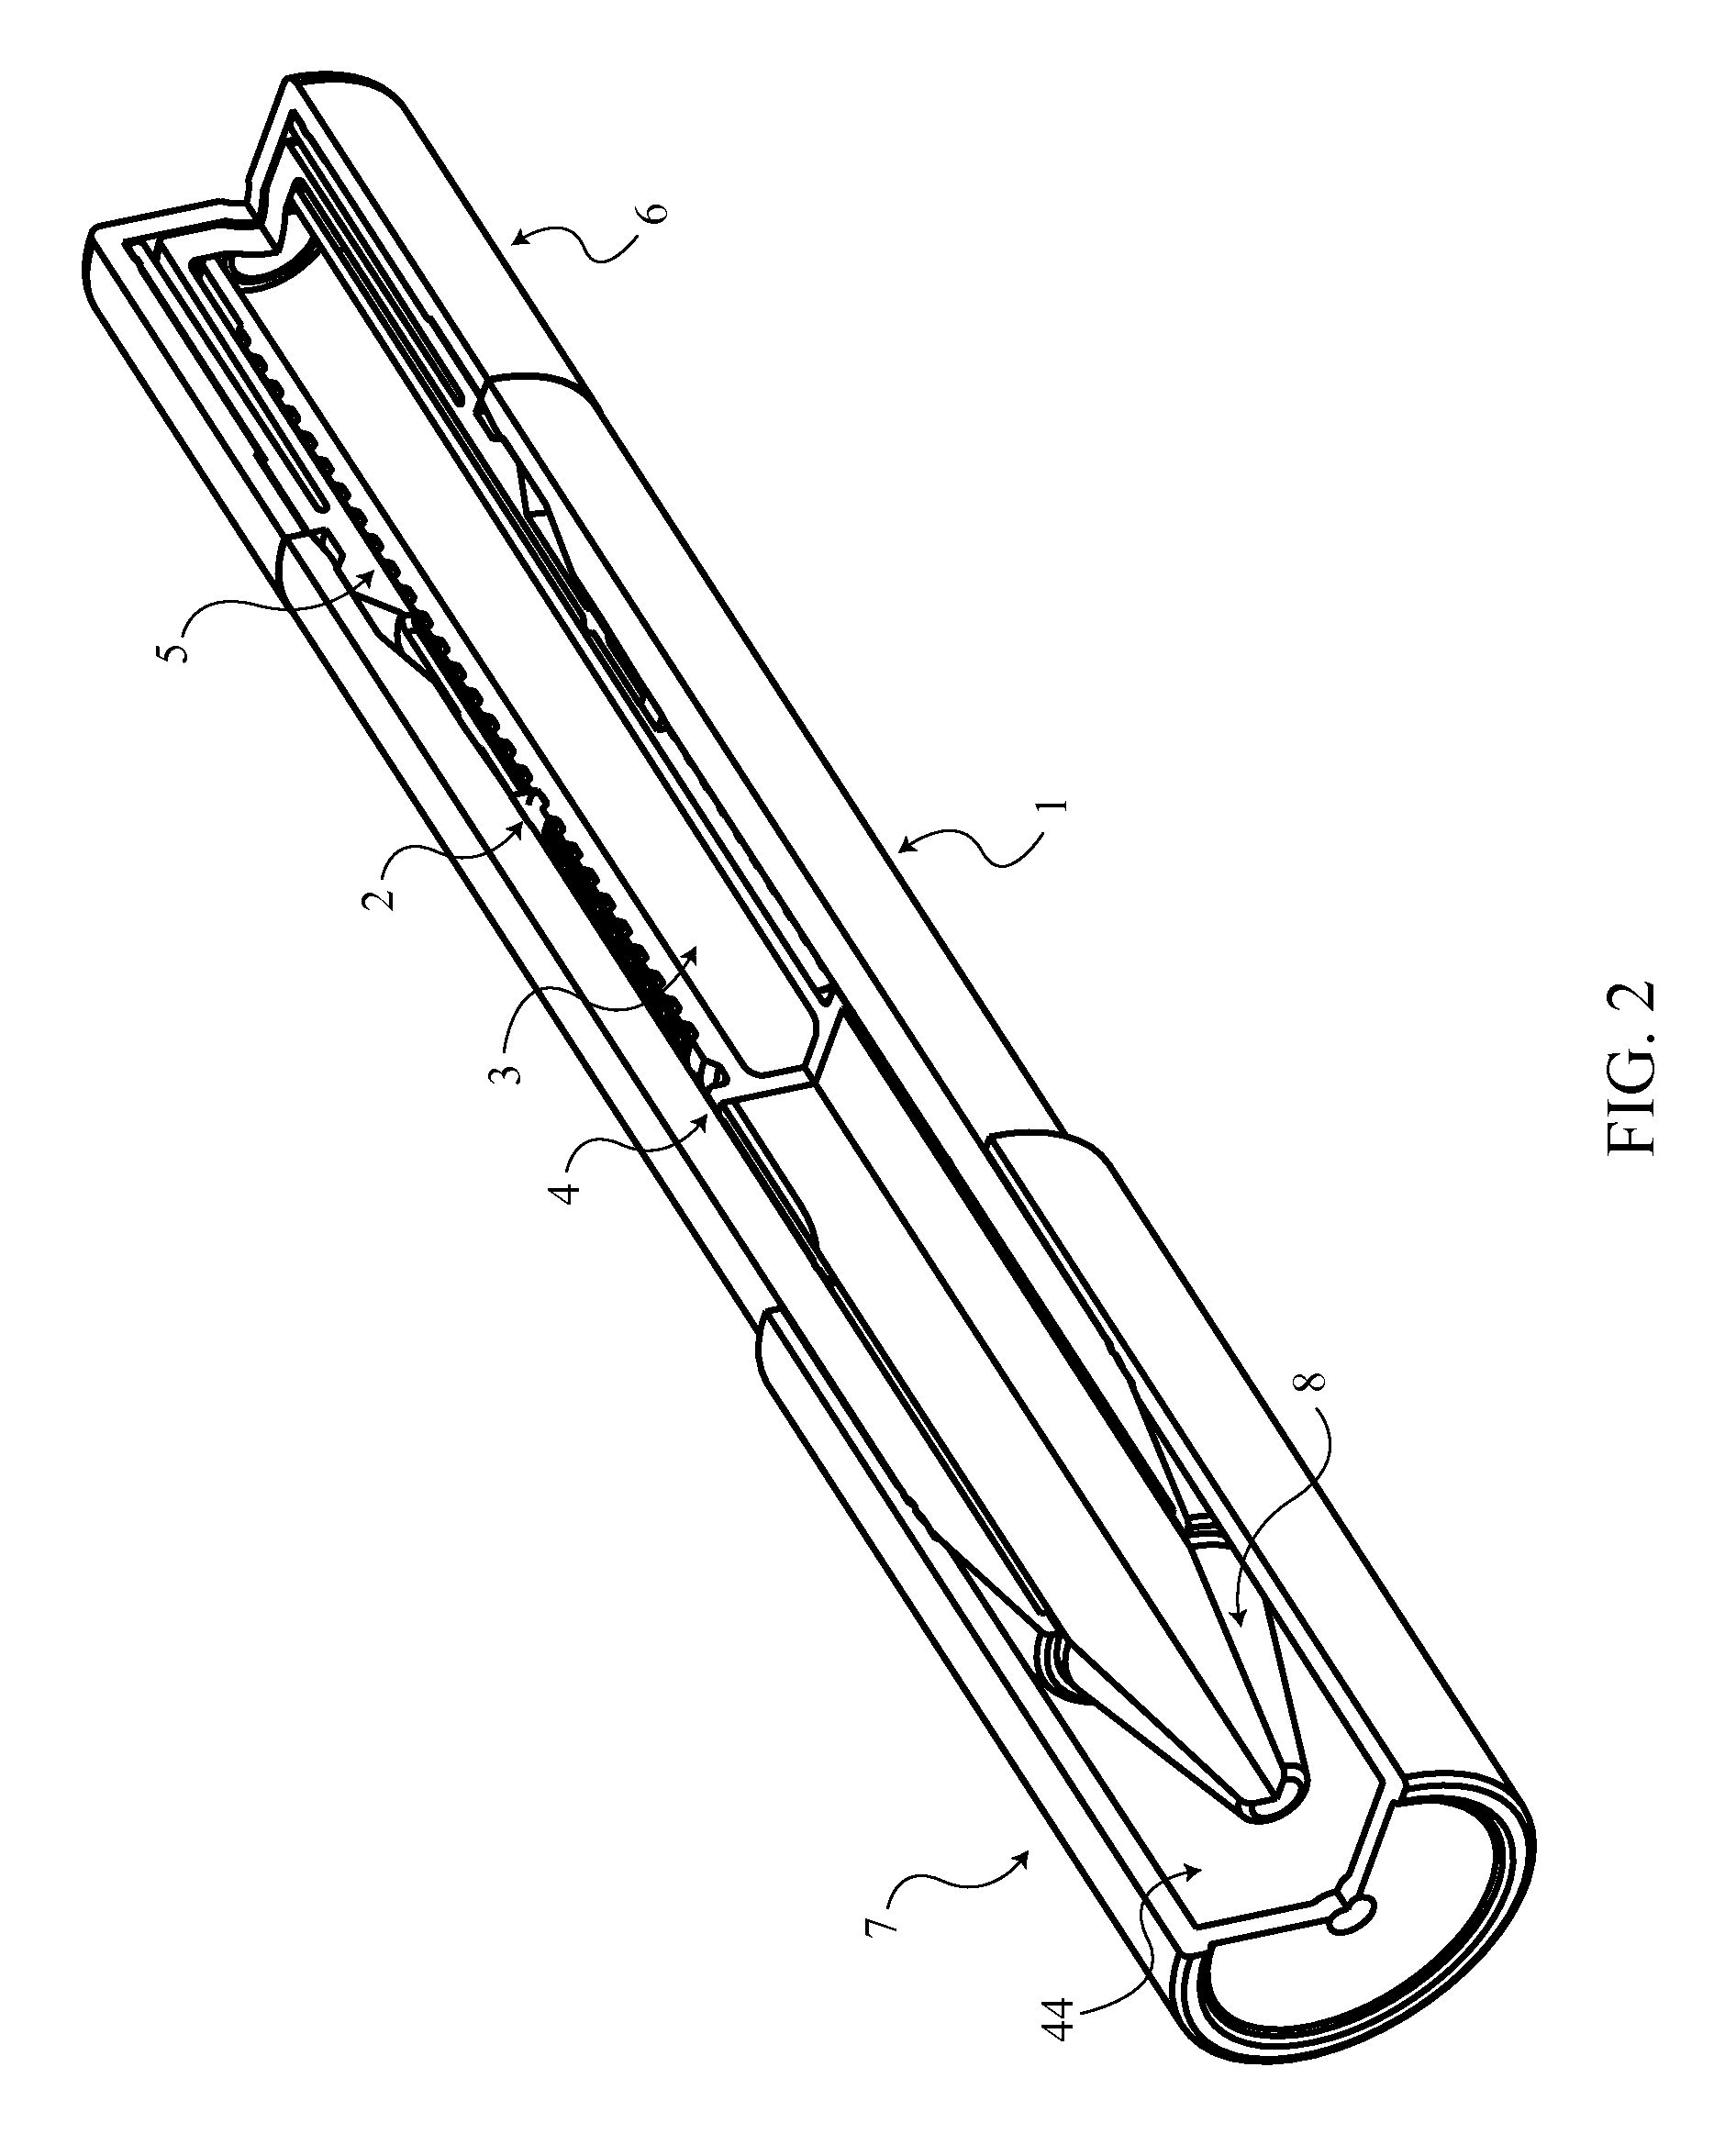 Airtight device for packaging and applying a solid product